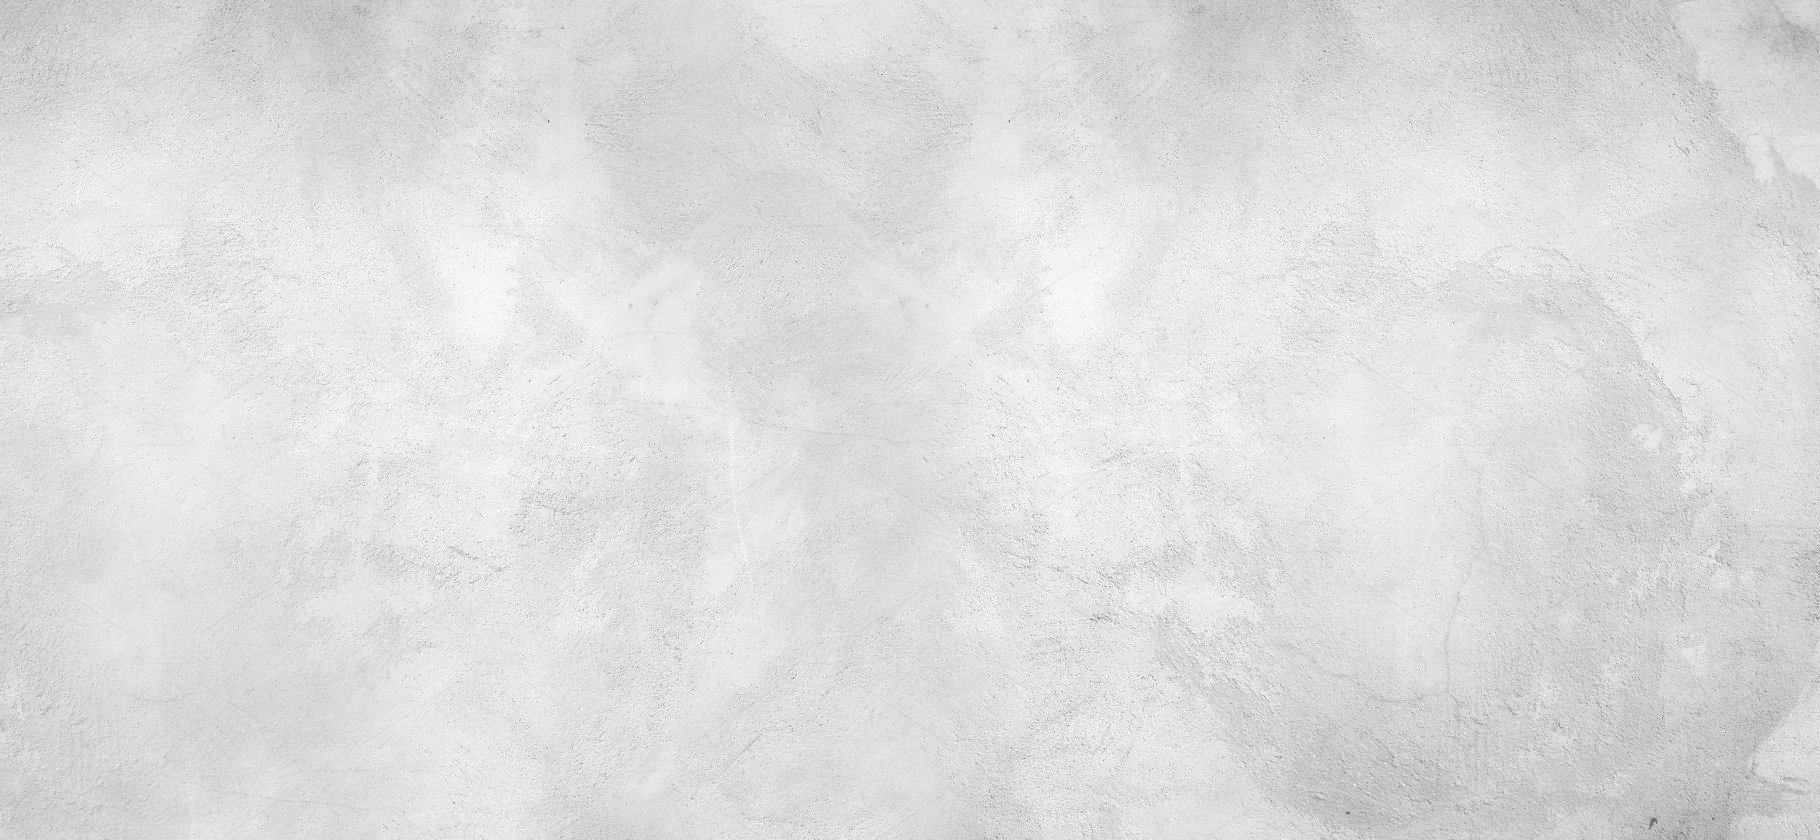 Grey concrete background texture wal cover image.